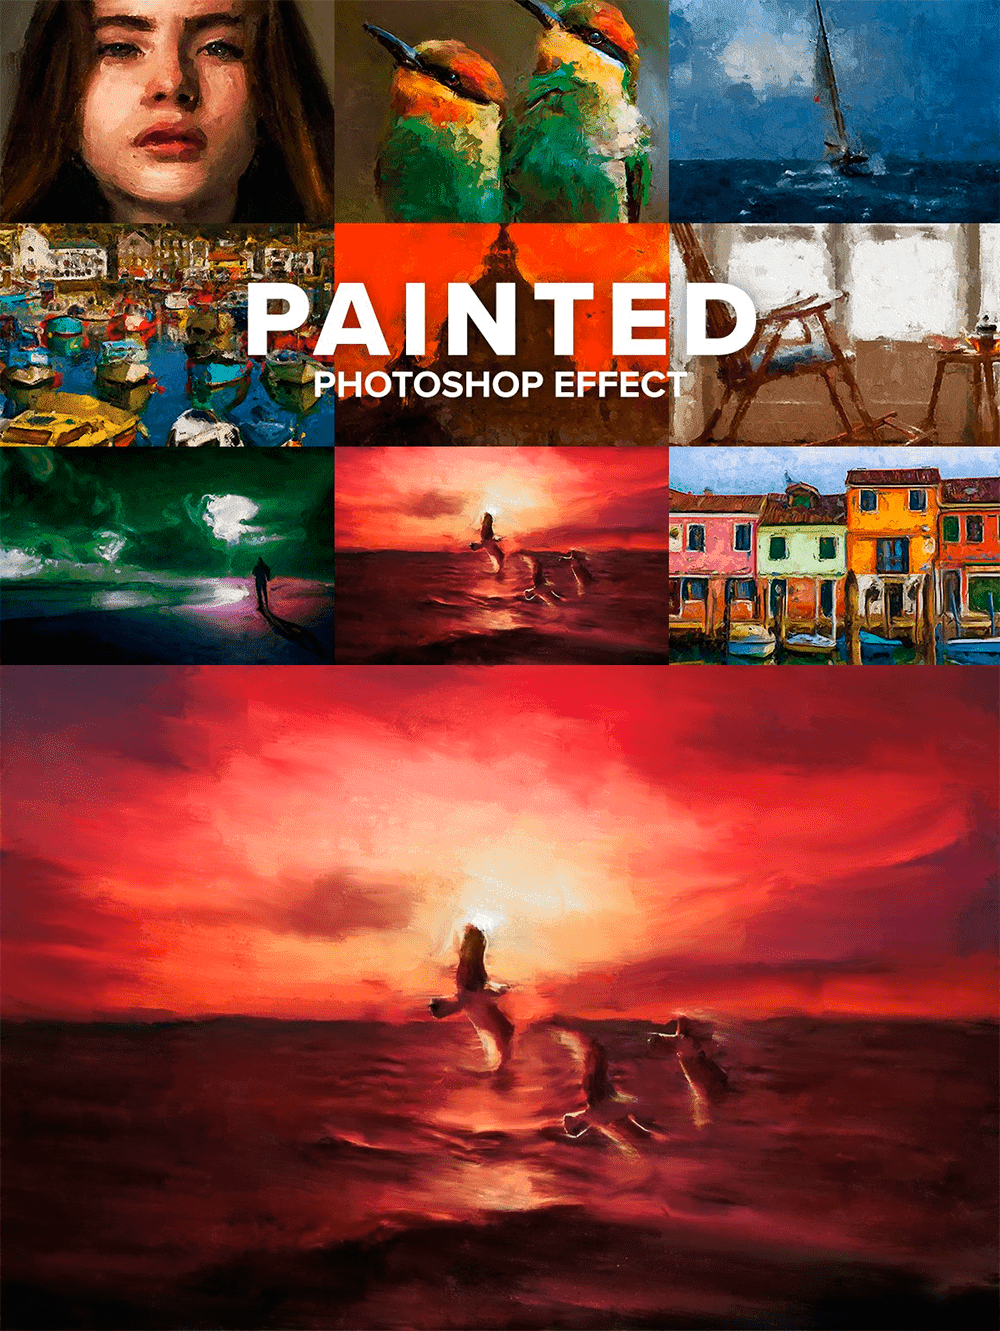 Painted photoshop effect, picture for pinterest 1000x1331.